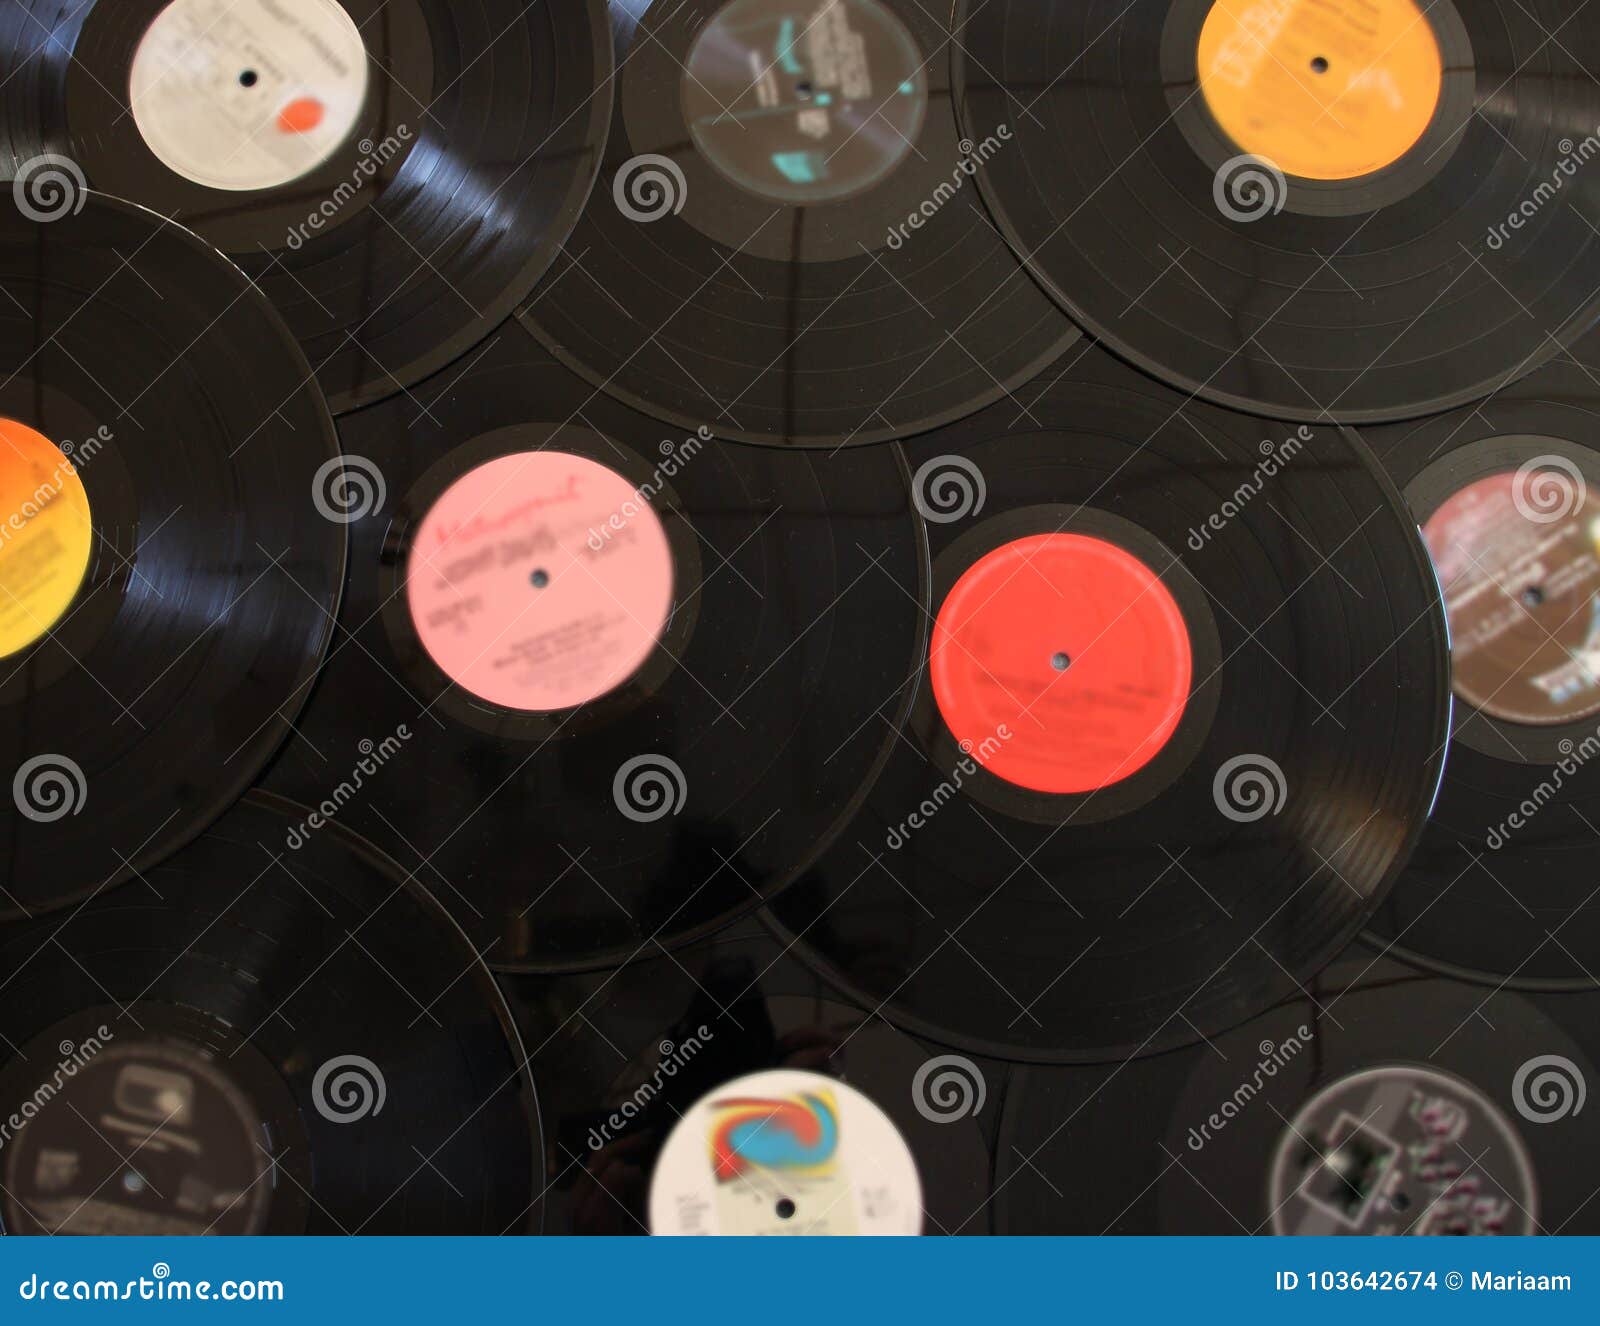 vinyl records background for listening to music